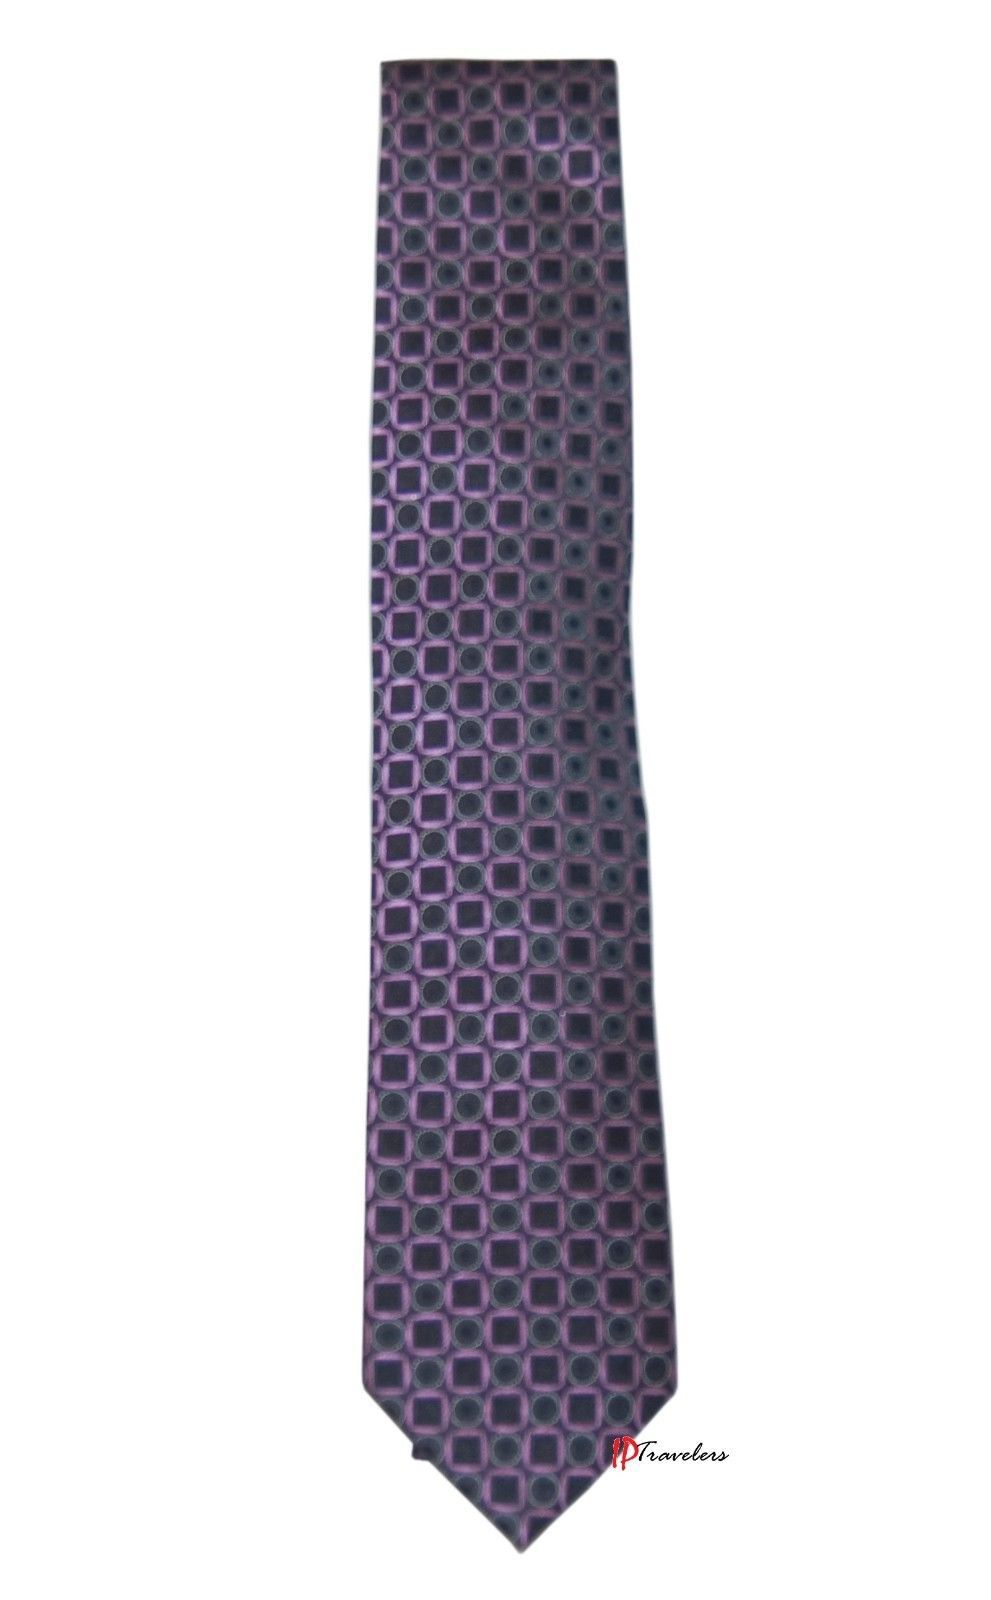 Geoffrey Beene Men's Neck Tie Purple and Black with Circles Square 100% Silk $55 - $22.00